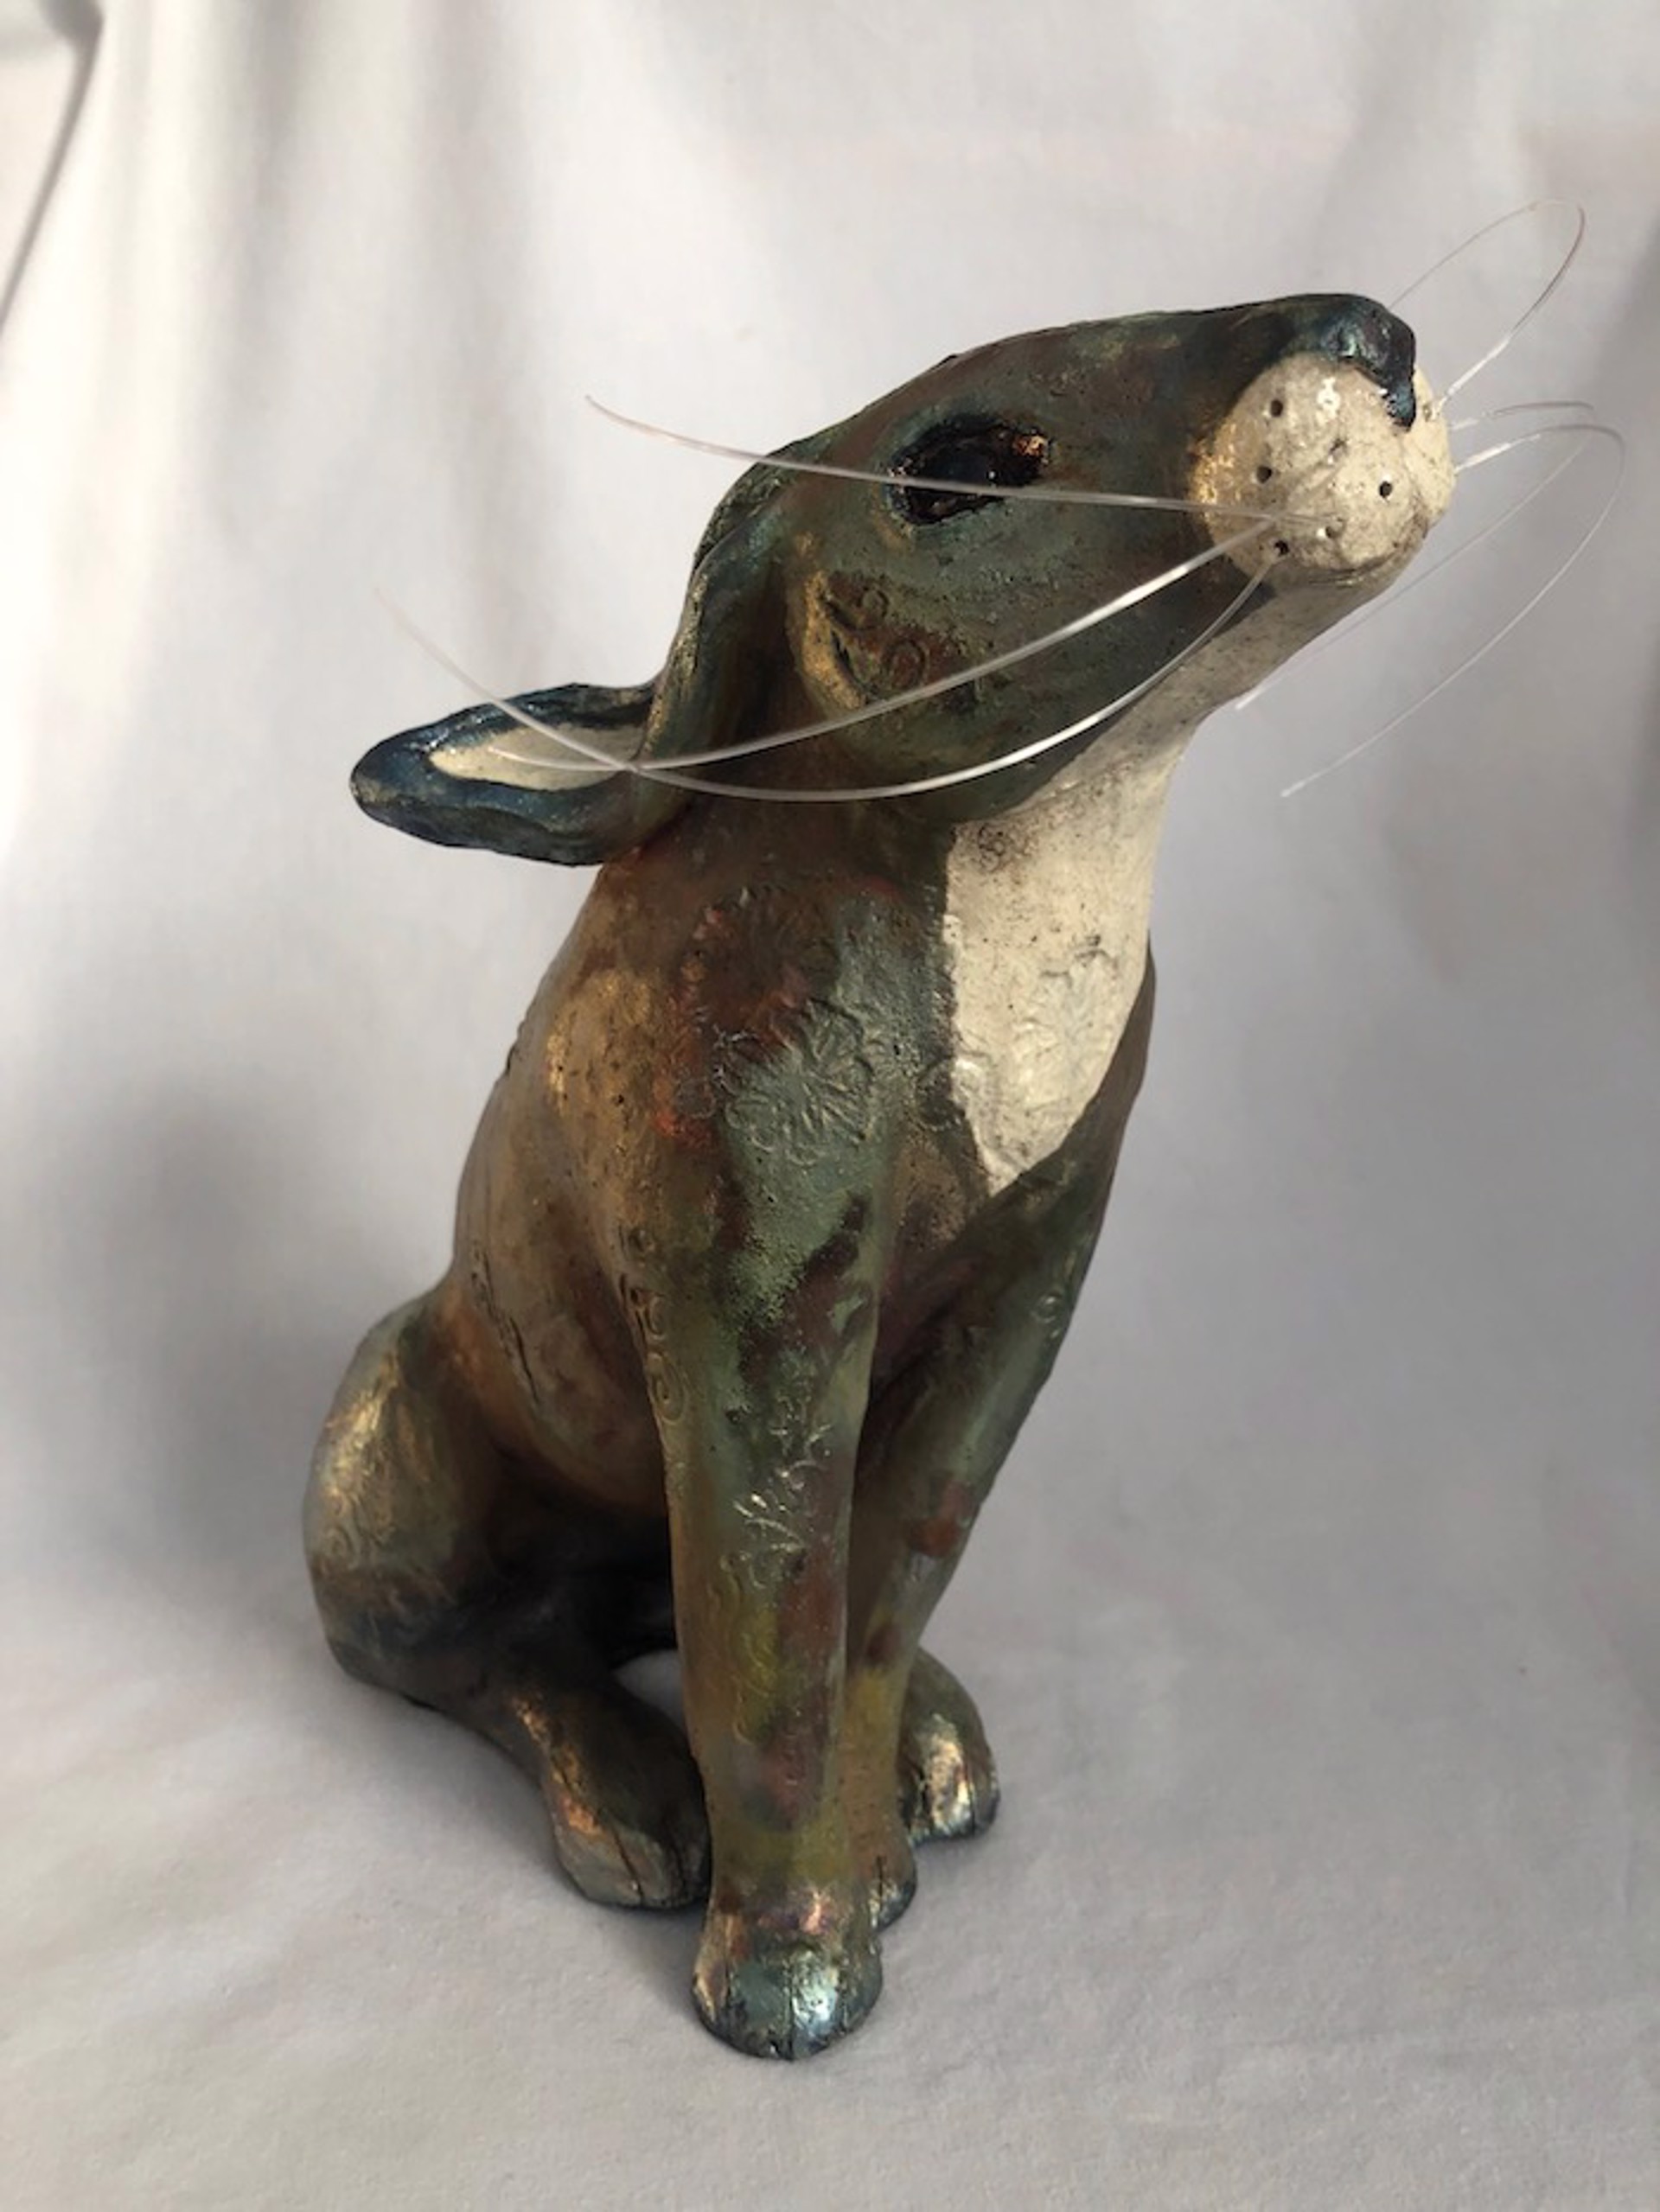 Rabbit with patterns by Lisa Wilkinson